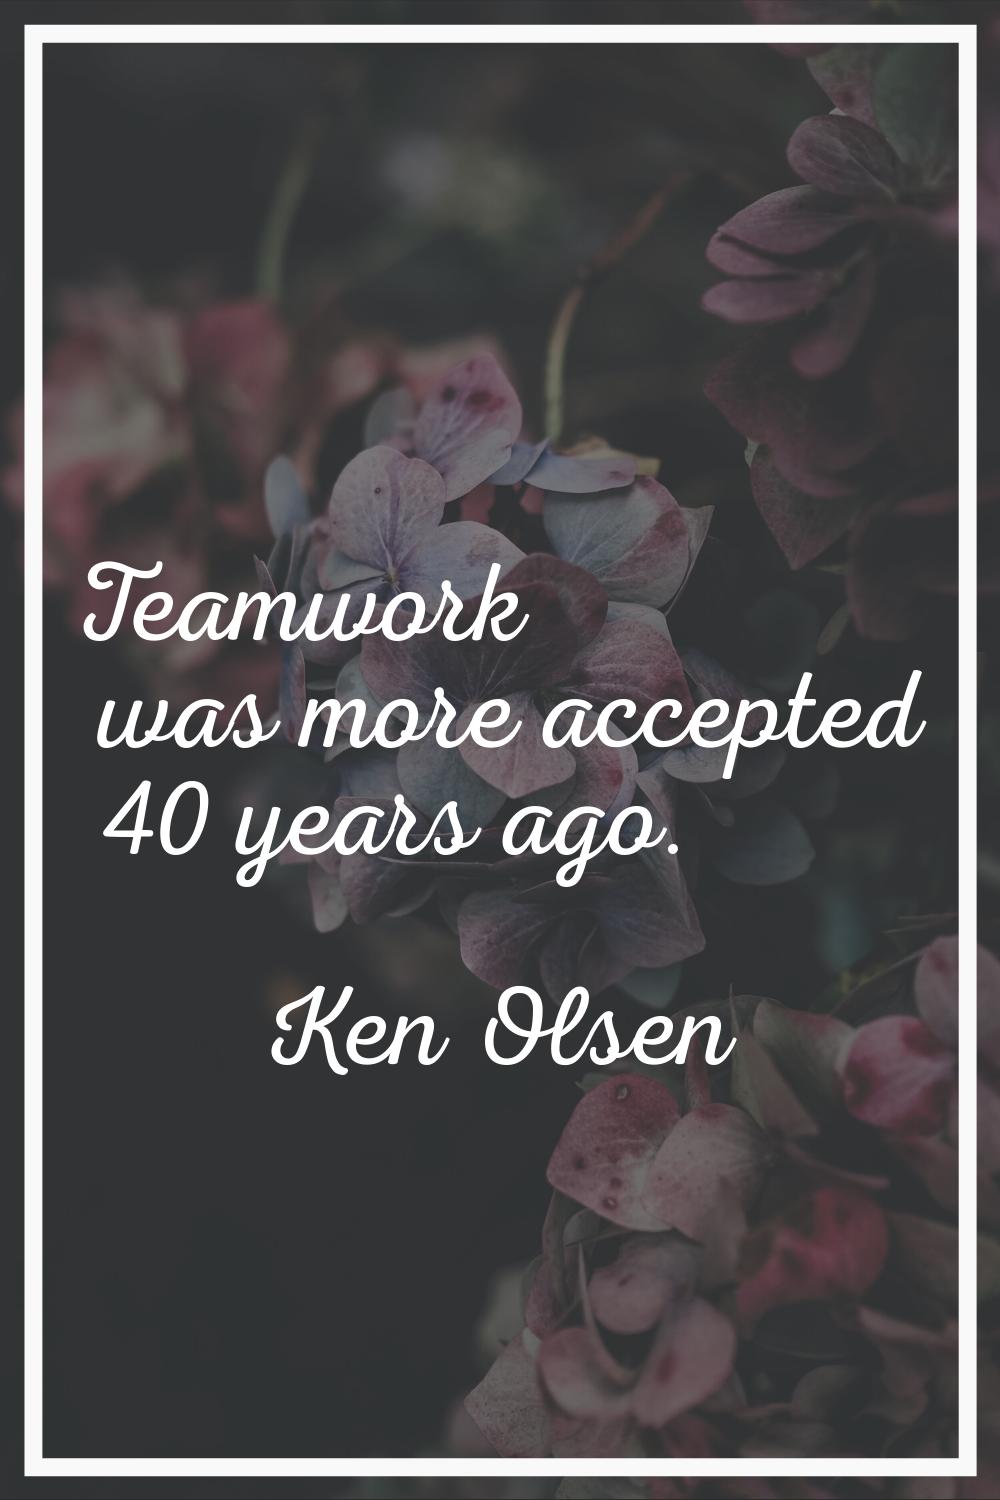 Teamwork was more accepted 40 years ago.